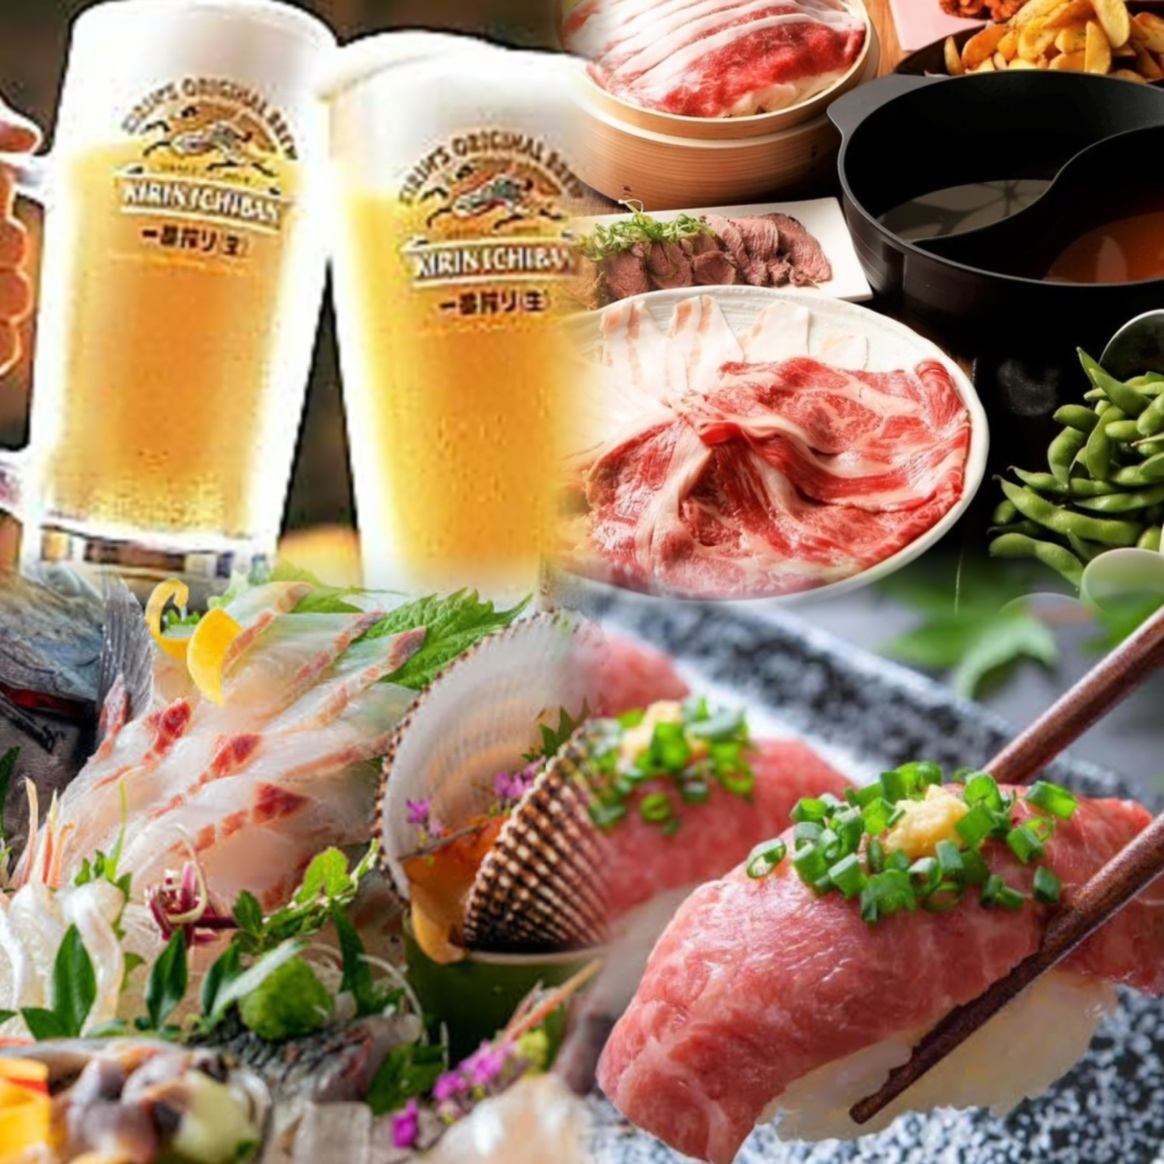 A new restaurant with private rooms where you can enjoy seafood has opened in front of Kyobashi Station. Check out the various courses and meat sushi!